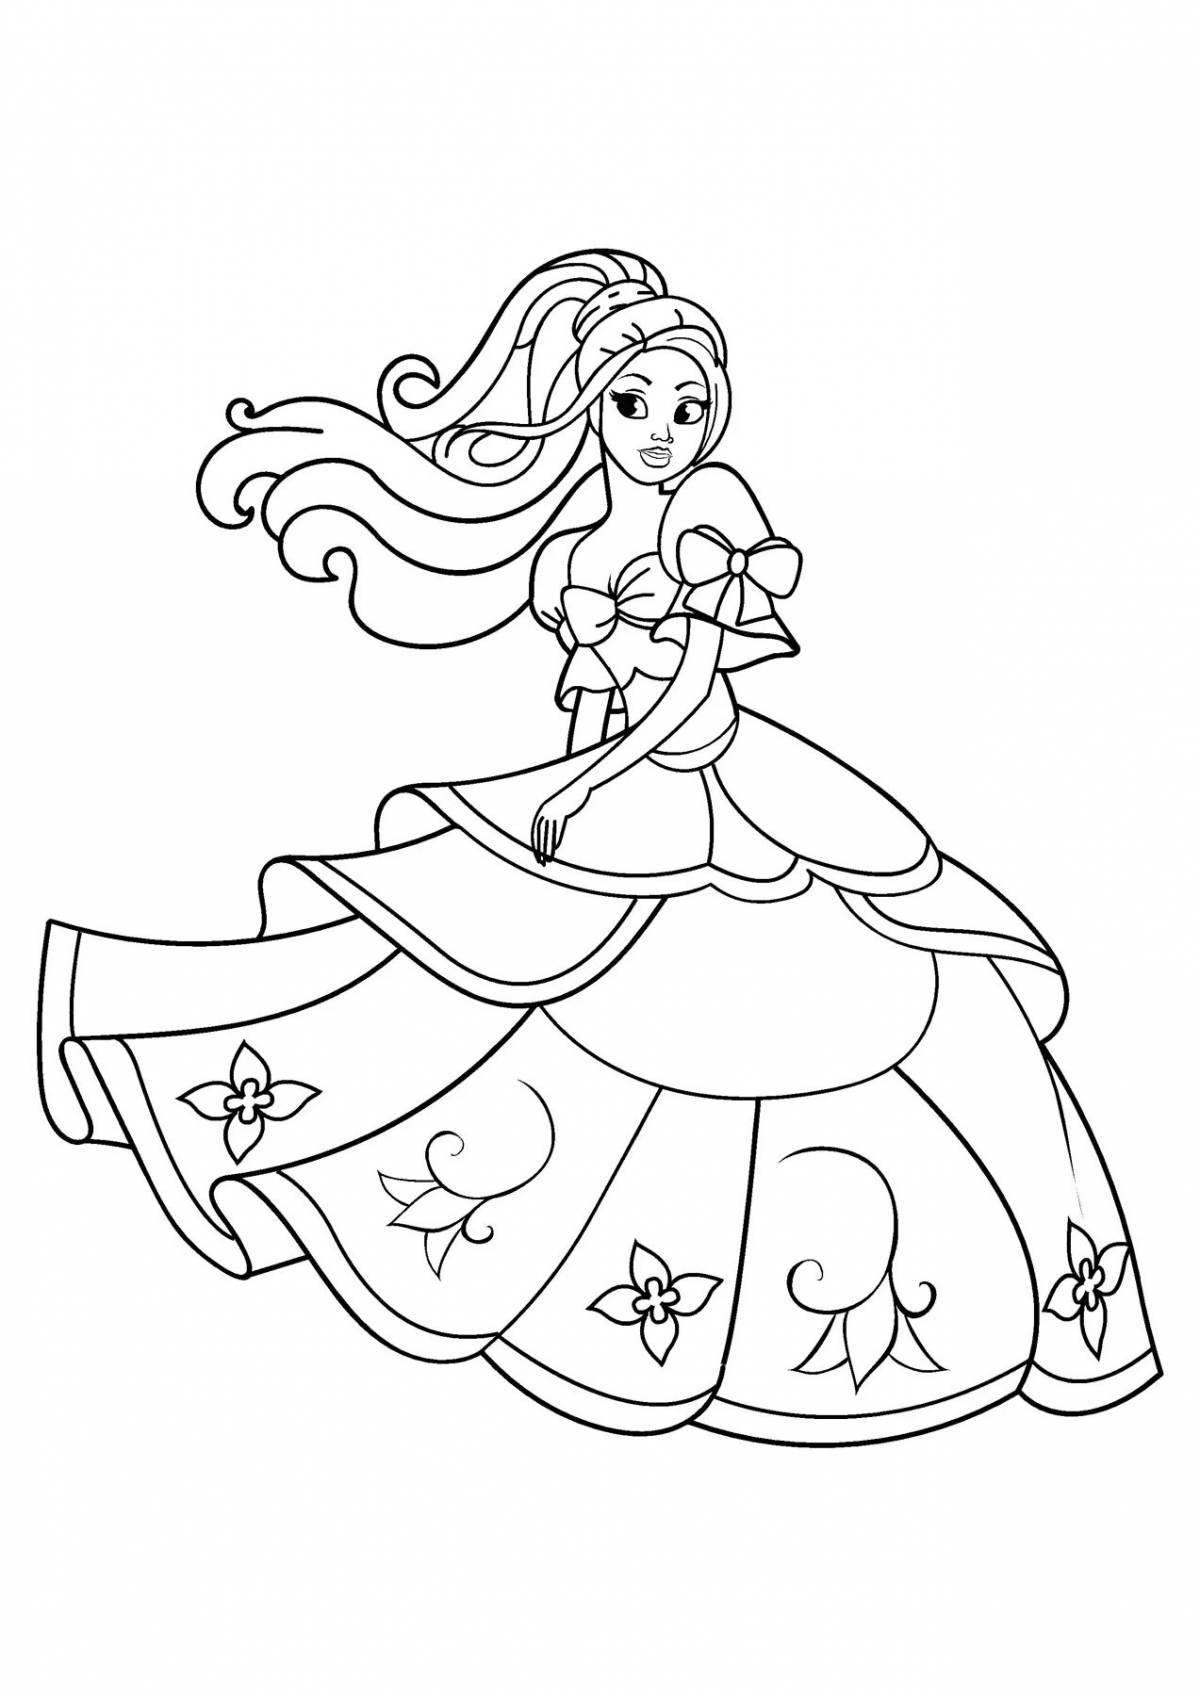 Great coloring book for girls princesses 5-6 years old